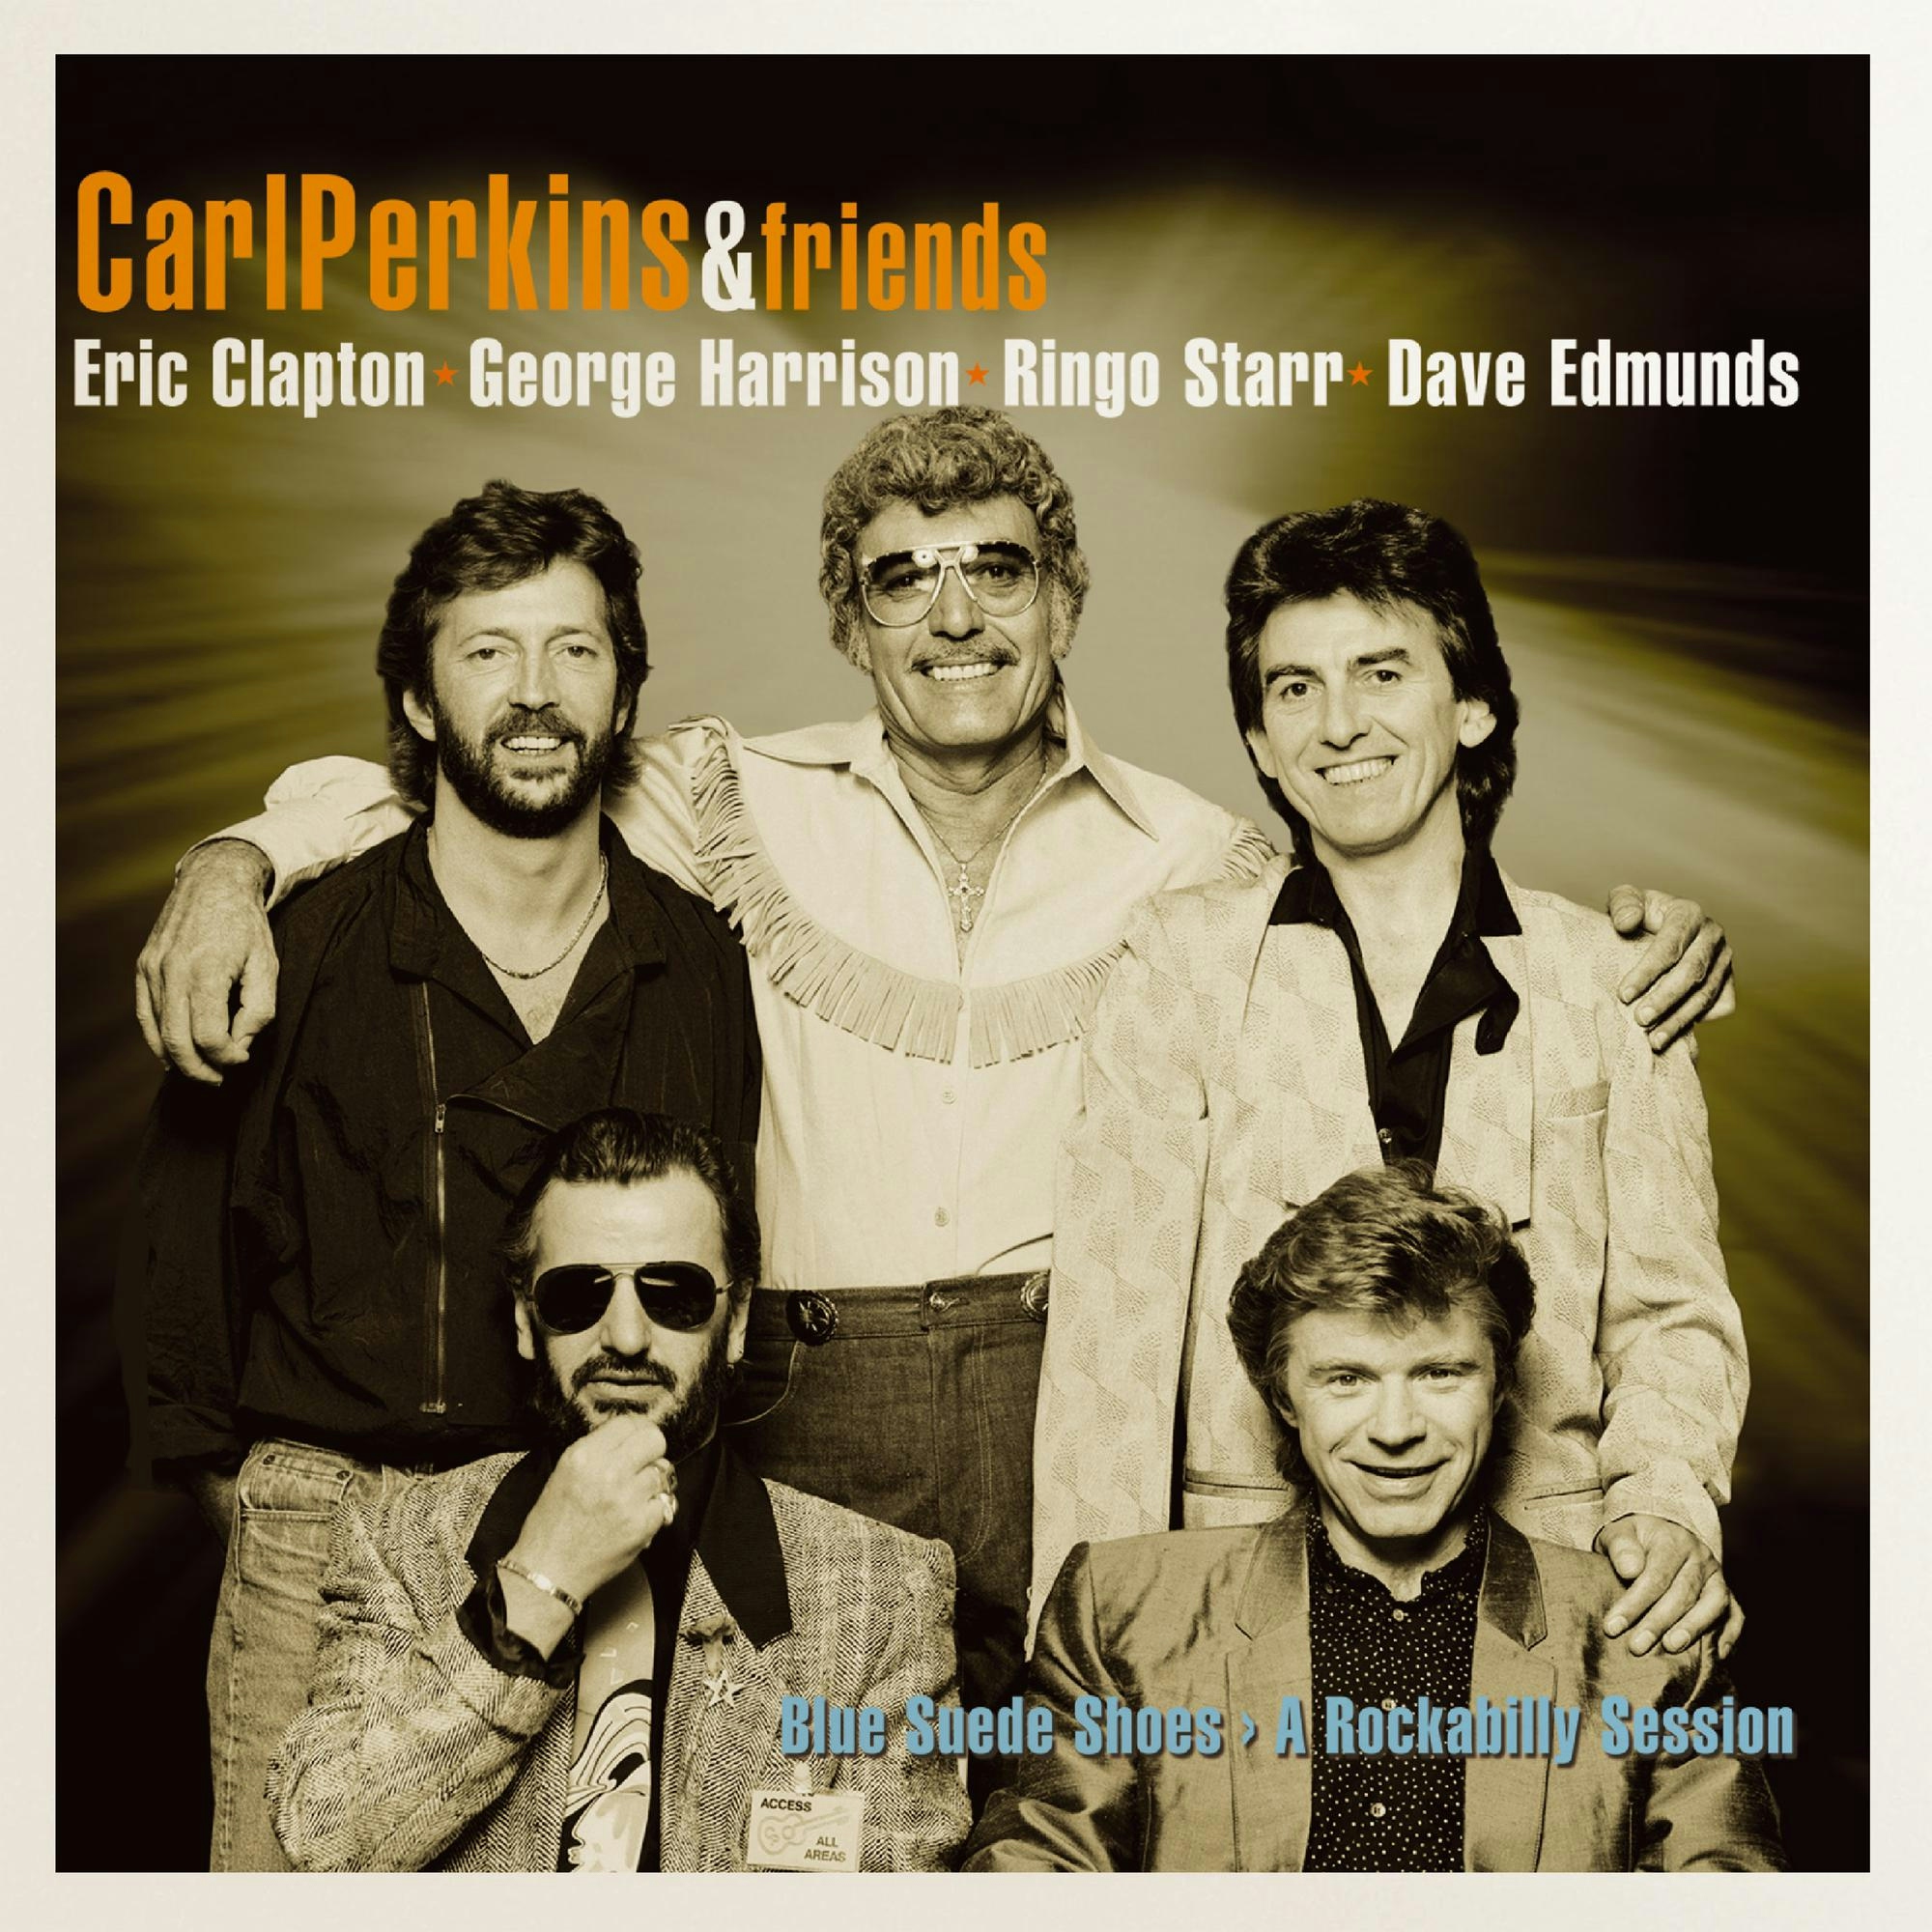 Album artwork for Album artwork for Blue Suede Shoes by Carl Perkins and Friends by Blue Suede Shoes - Carl Perkins and Friends